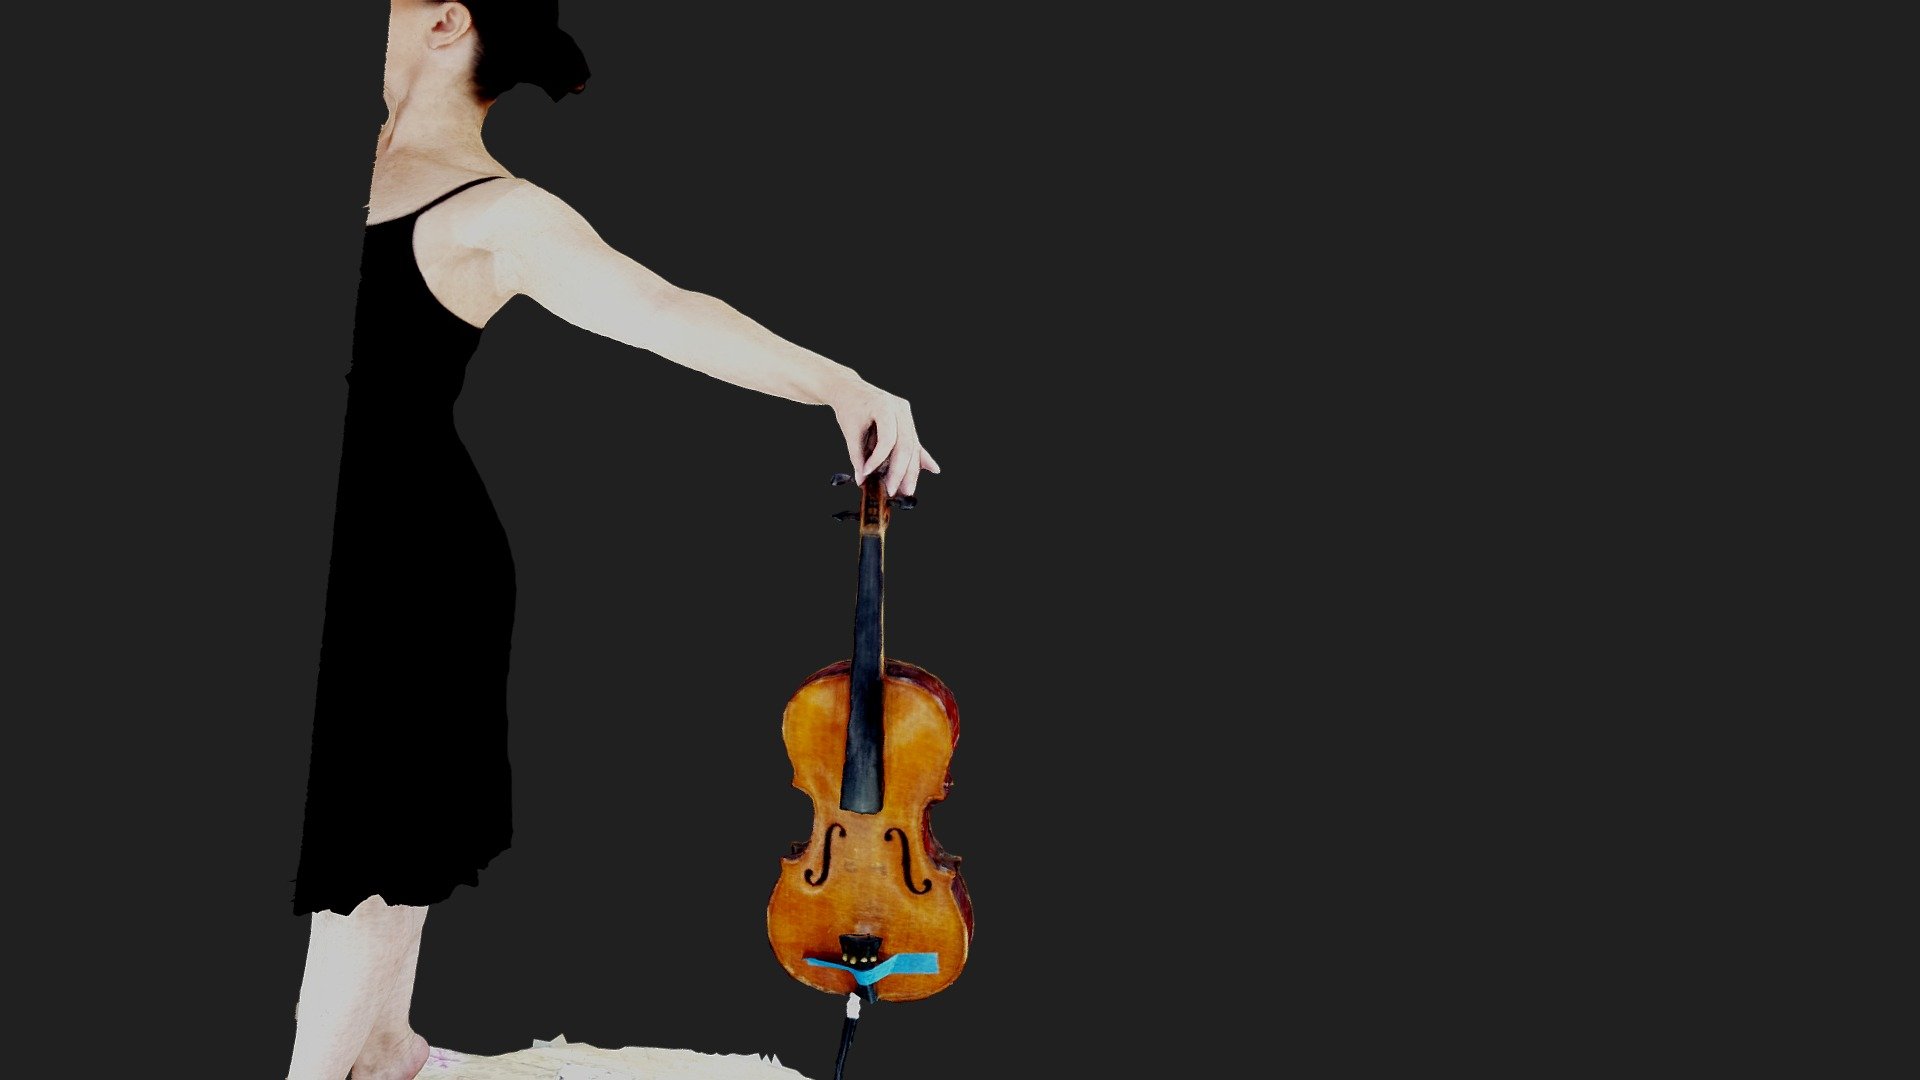 work in progress… dancer with violin pose matcap no smoothing for placement in 13 foot bronze statue by artist Michael Kelly… 3D scan by www.quickpic3d.com using model QP112 photogrammetry rig scan was taken in approx hundreth of a second as dancer was moving into pose no post processing once out of capturing reality - violin pose no smooth for 13ft bronze statue - 3D model by QuickPic3d (@argus.3d.studios) 3d model